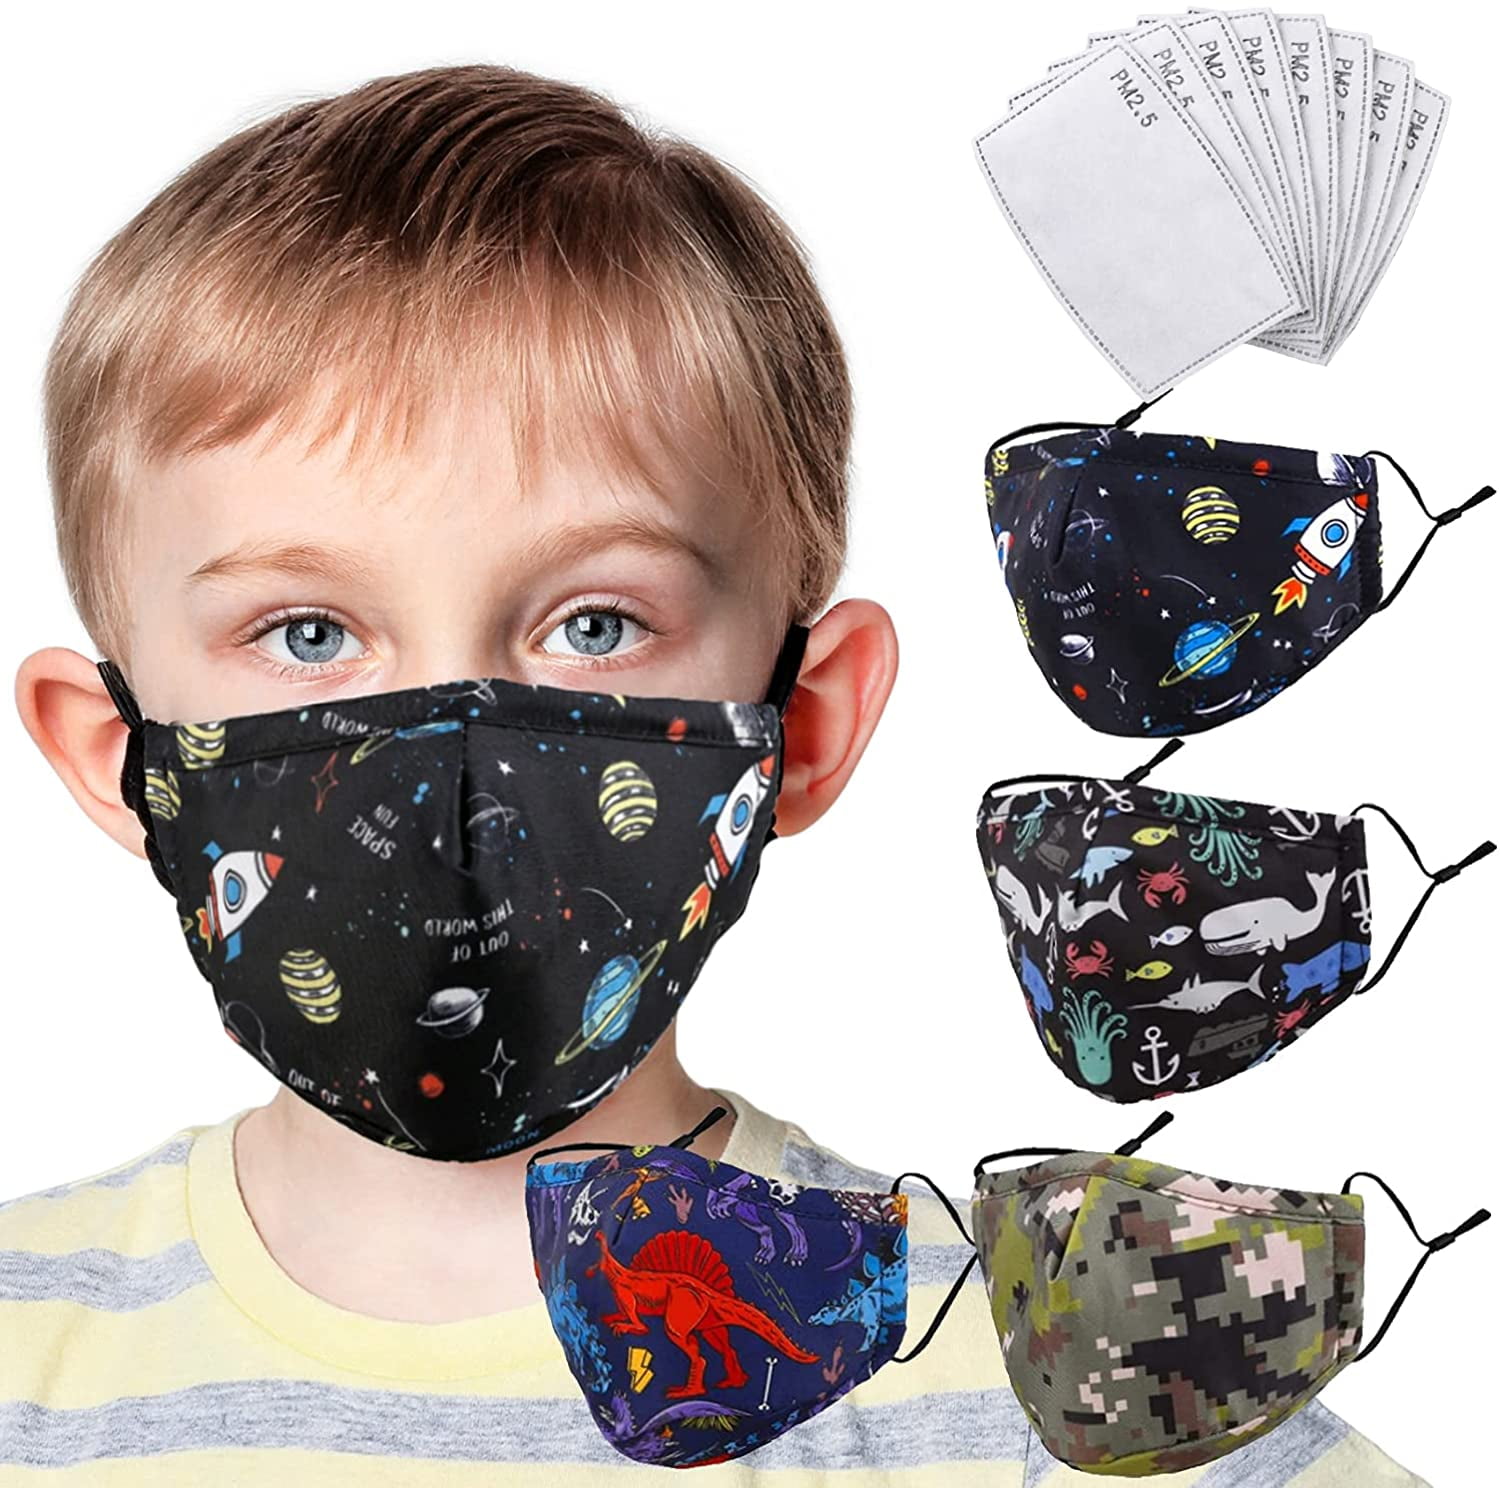 Outdoor Activity Running Disposable Kids Face Bandana Covers Childrens Lightweight Breathable Mouth Coverings Protective with Cute Pattern for School 